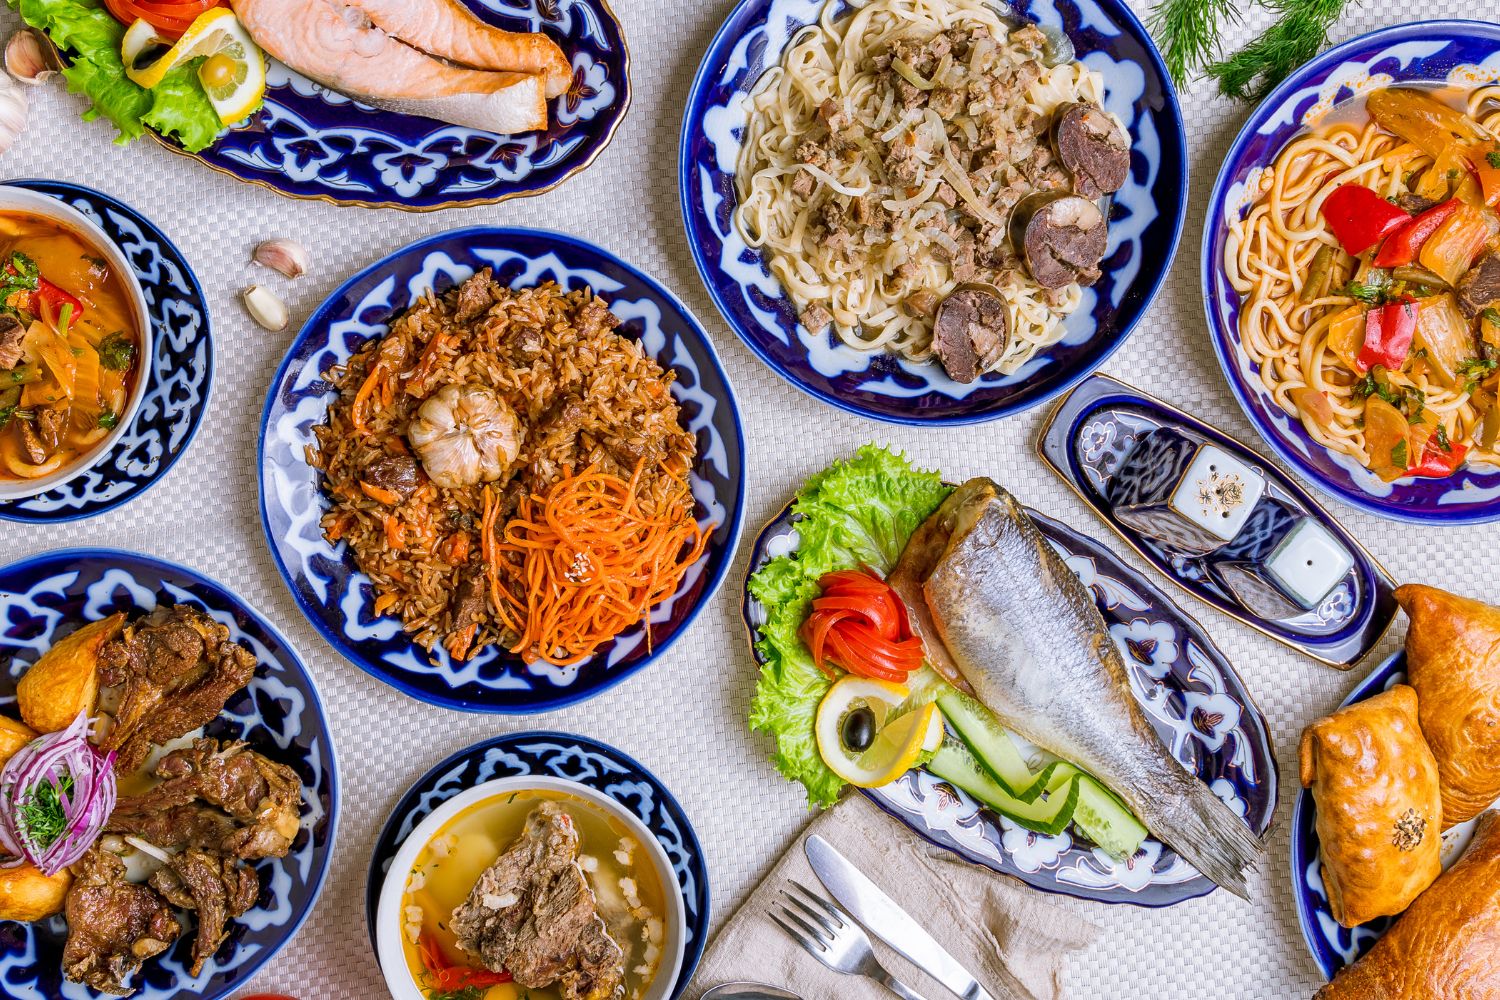 10 Must-Try Dishes from Around the World Global Cuisine at Your Fingertips